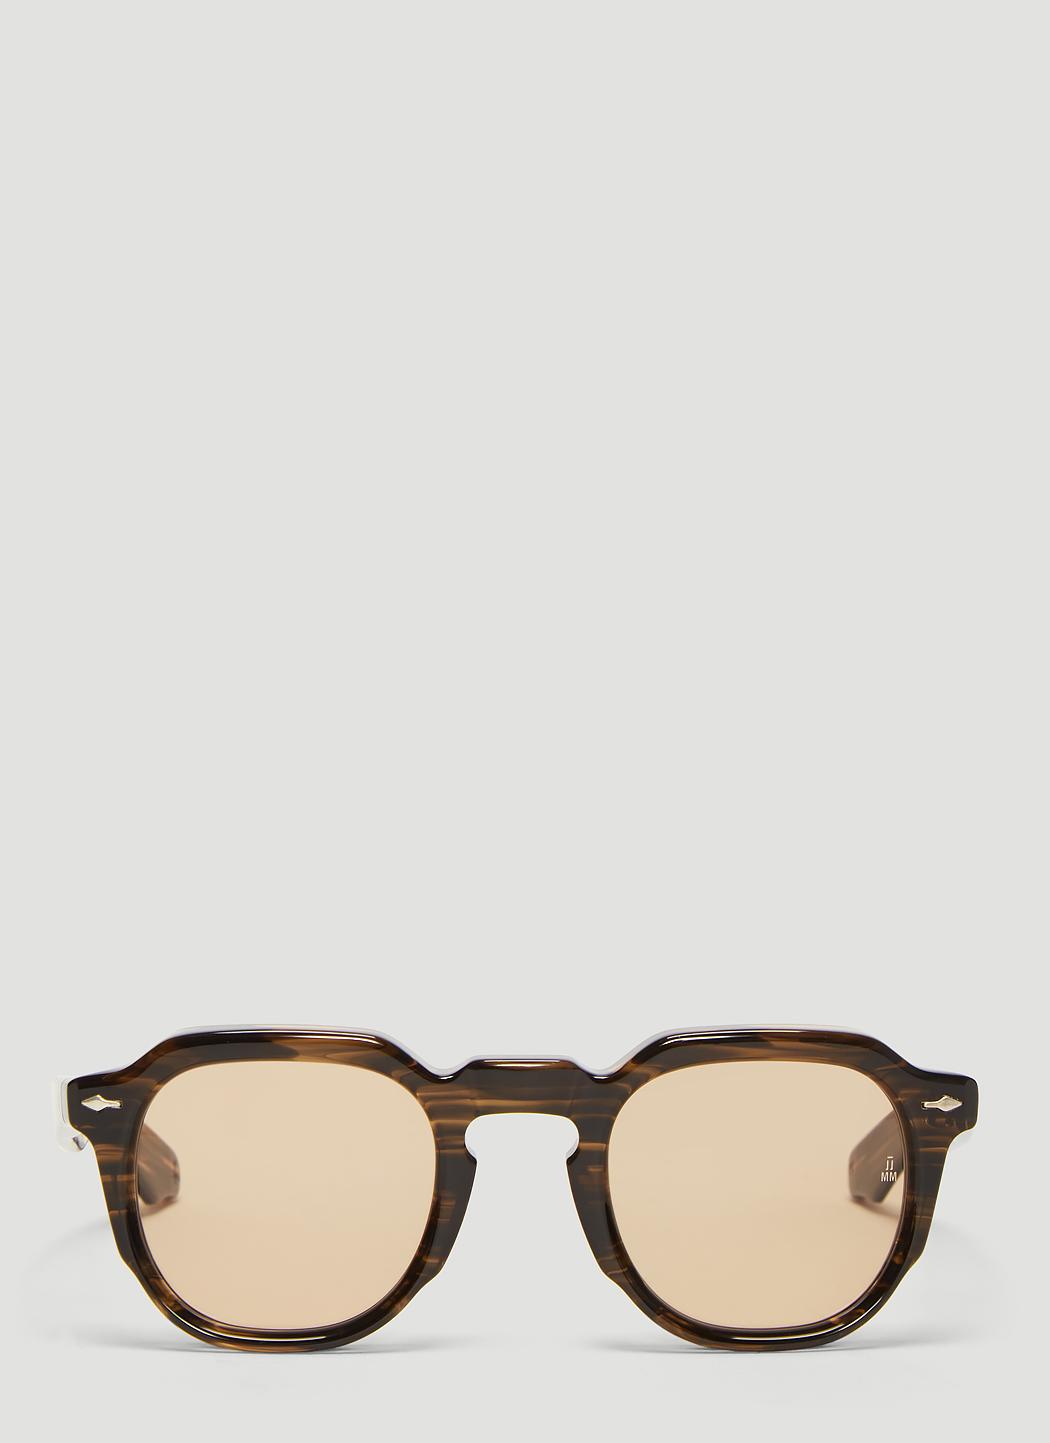 Jacques Marie Mage Ripley Sunglasses In Ash for Men - Lyst